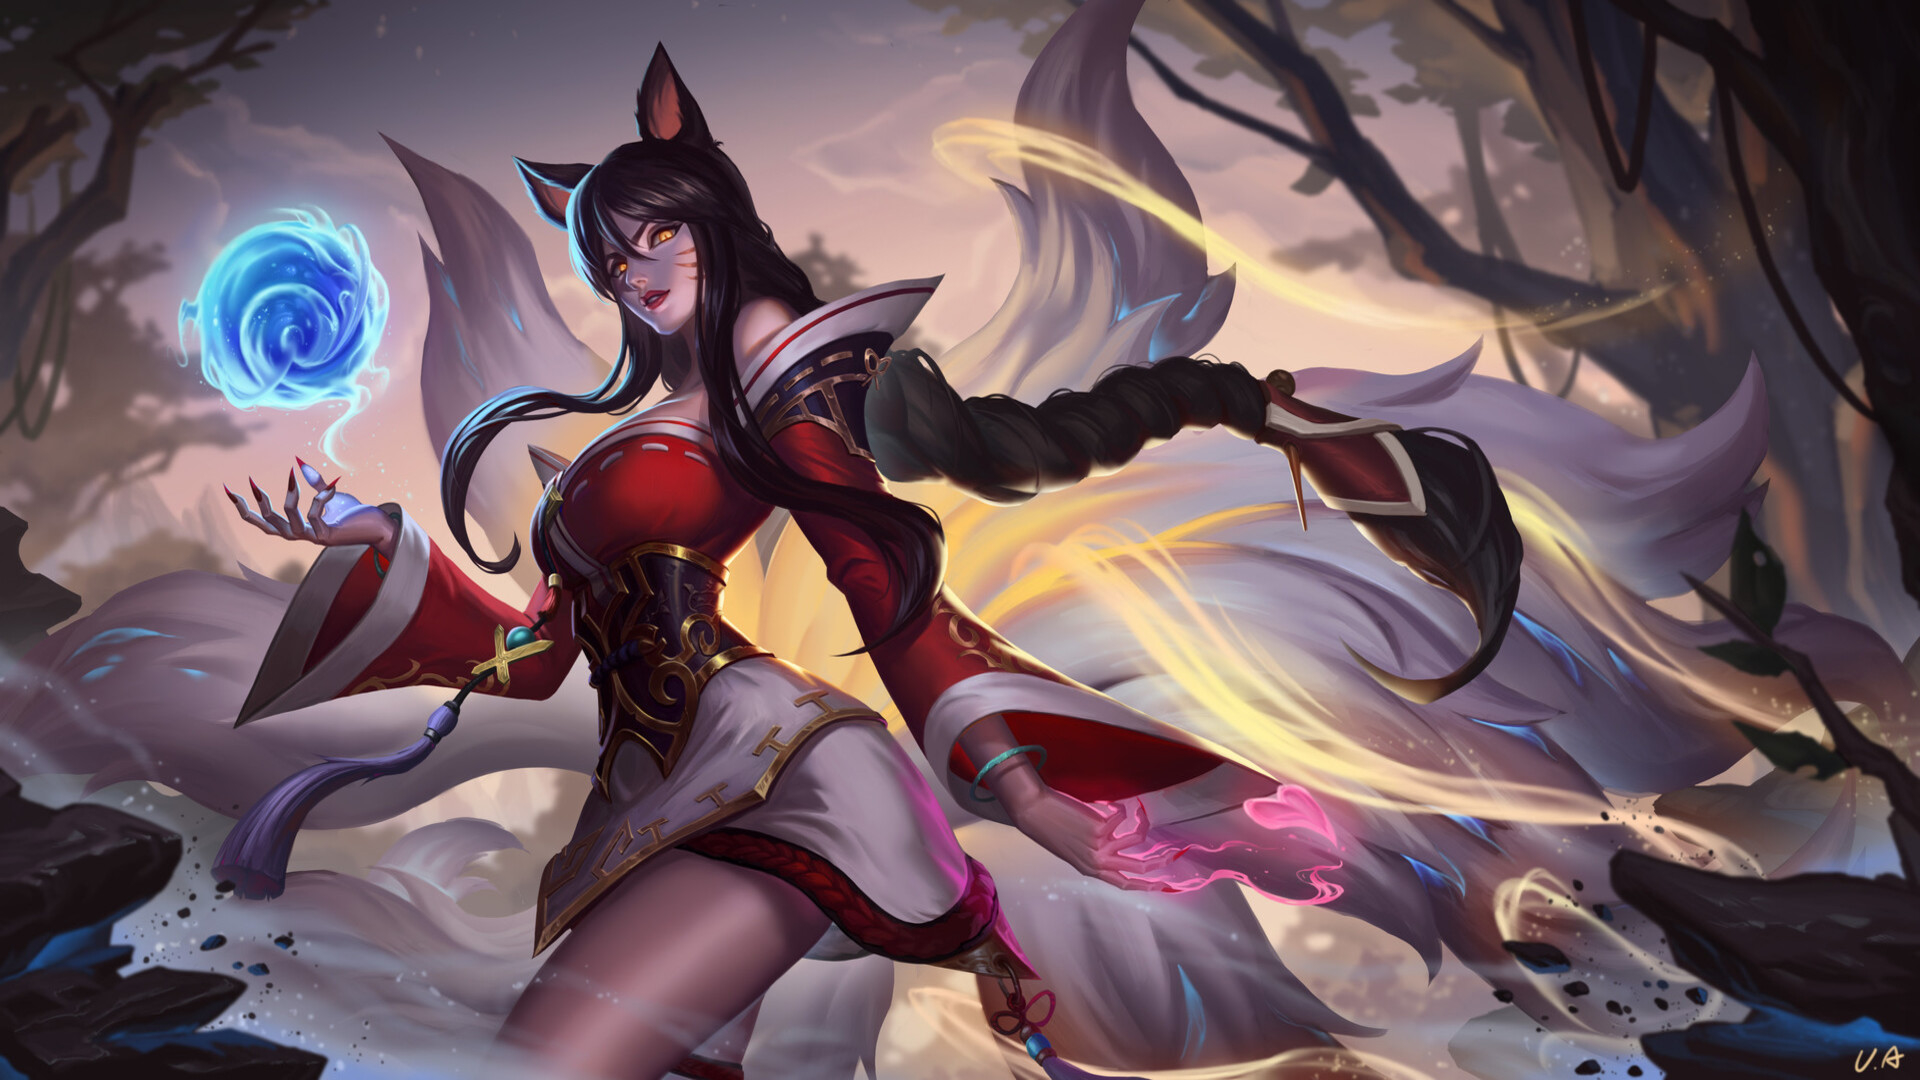 Learn more about Ahri's backstory and abilities in the official League of Legends universe.
3. Ahri - Leaguepedia - wide 10